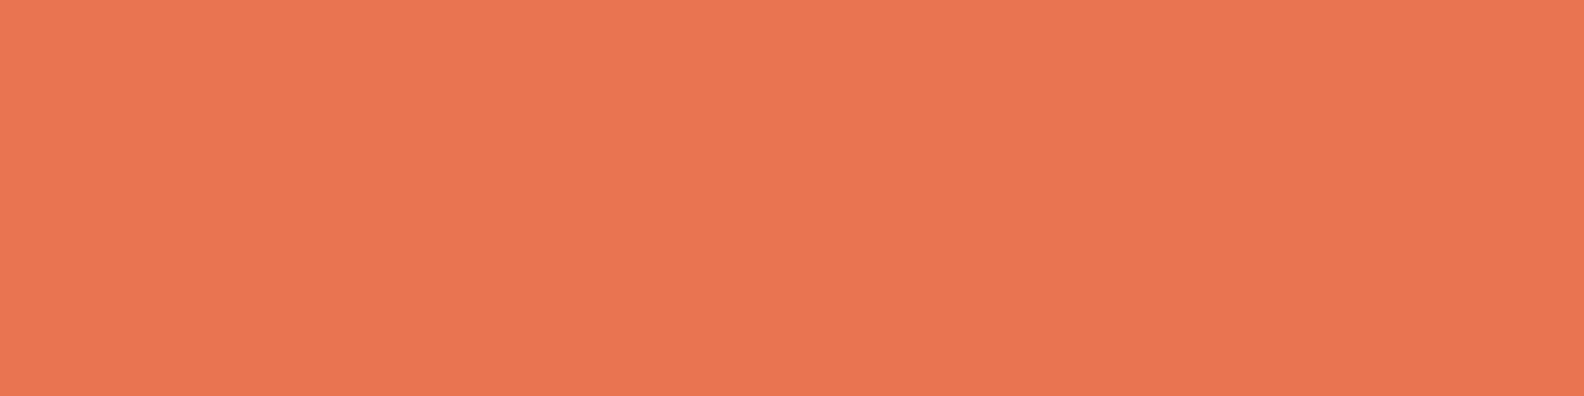 1584x396 Light Red Ochre Solid Color Background